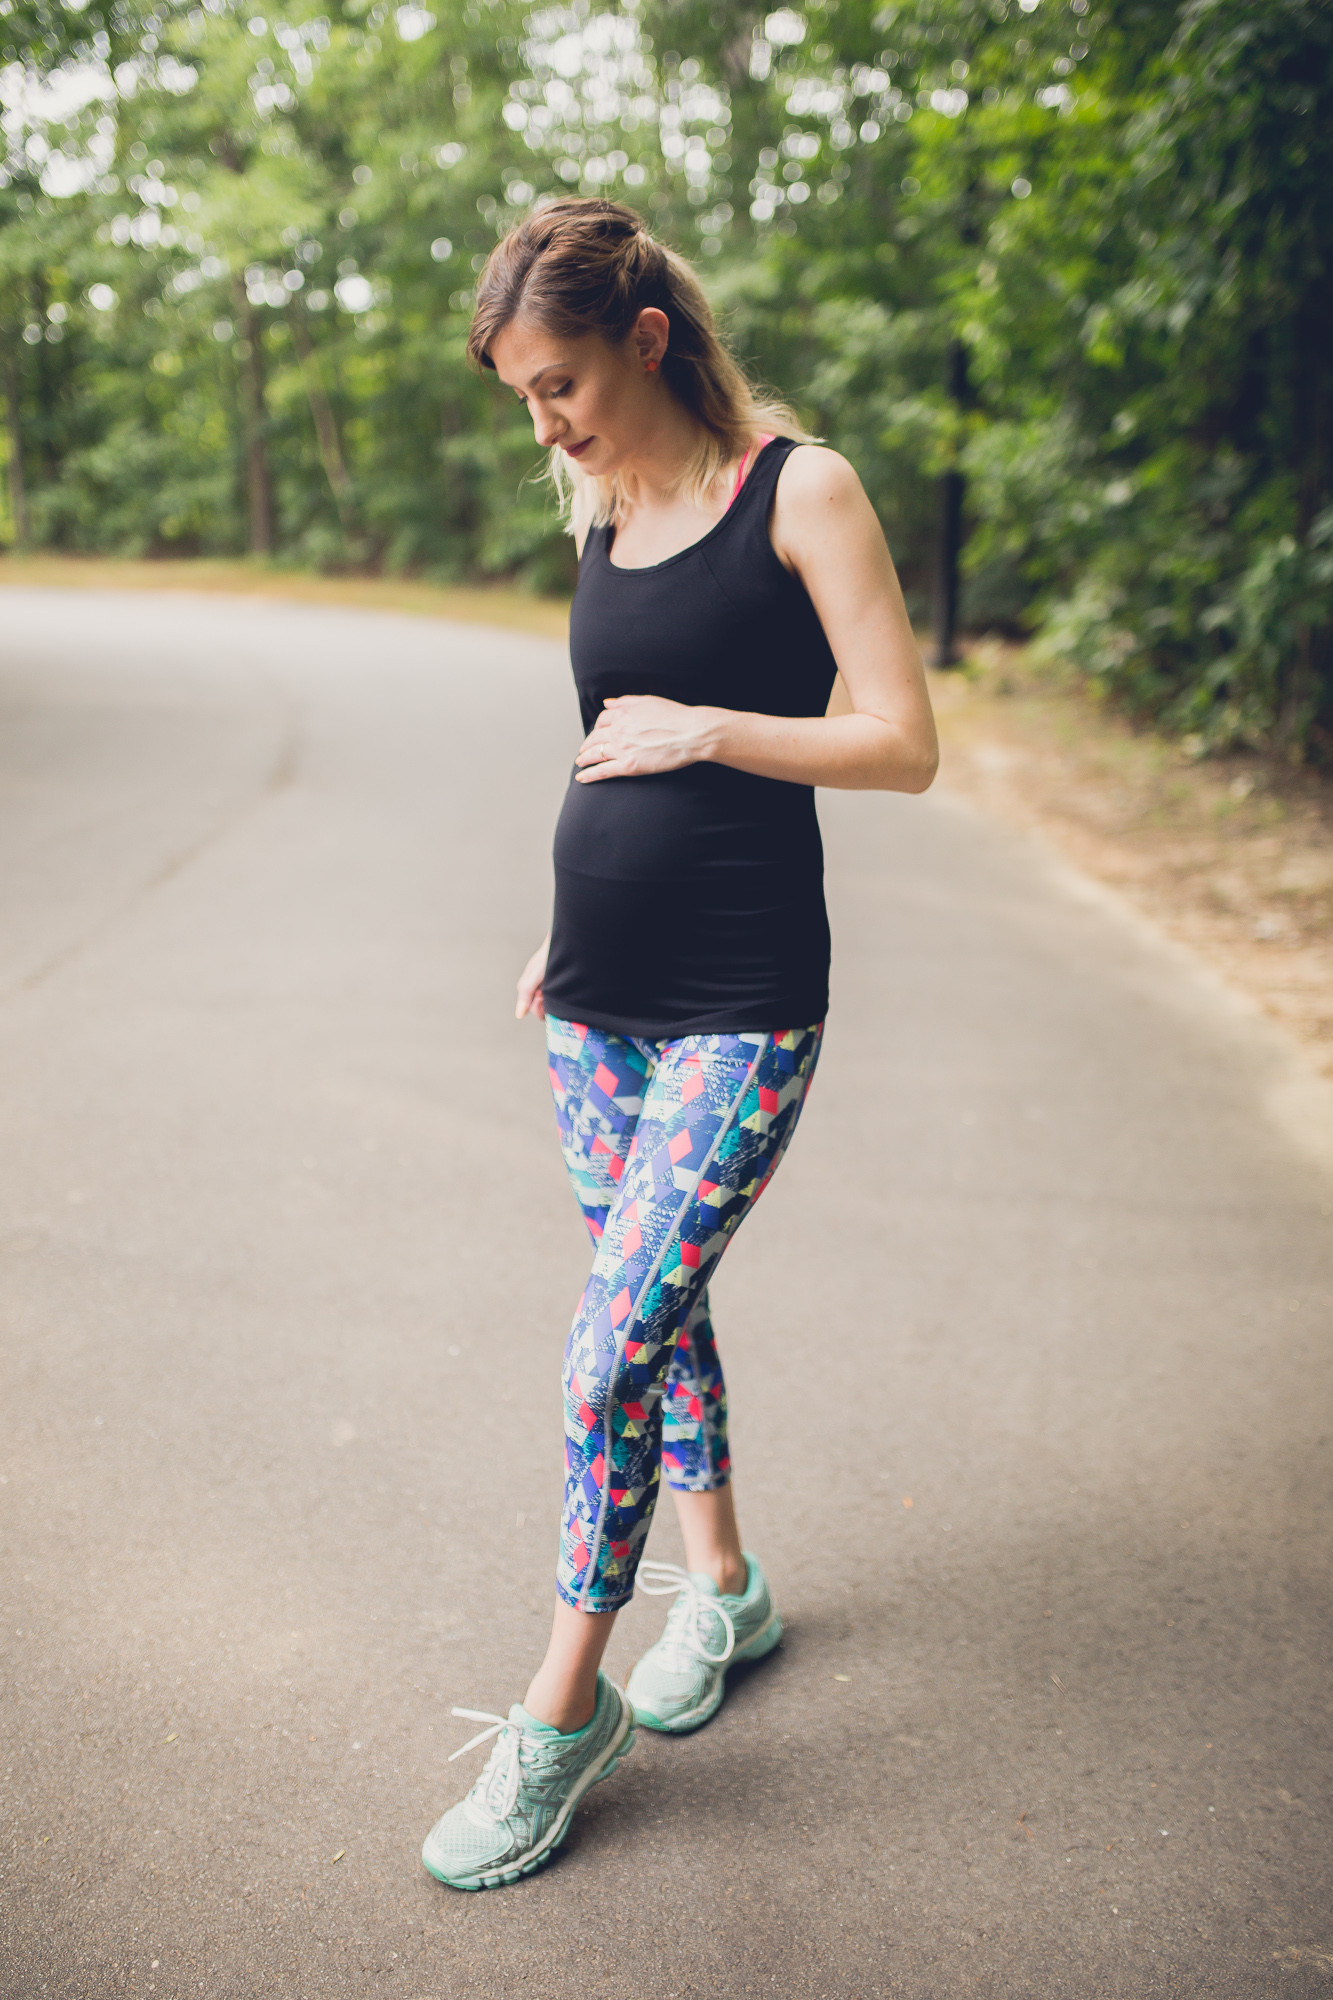 Lifestyle and fashion blogger Jessica Linn from Linn Style wearing athletic maternity wear from POP! Maternity a company from Australia. A geometric patterned capri yoga pants and a black singlet.